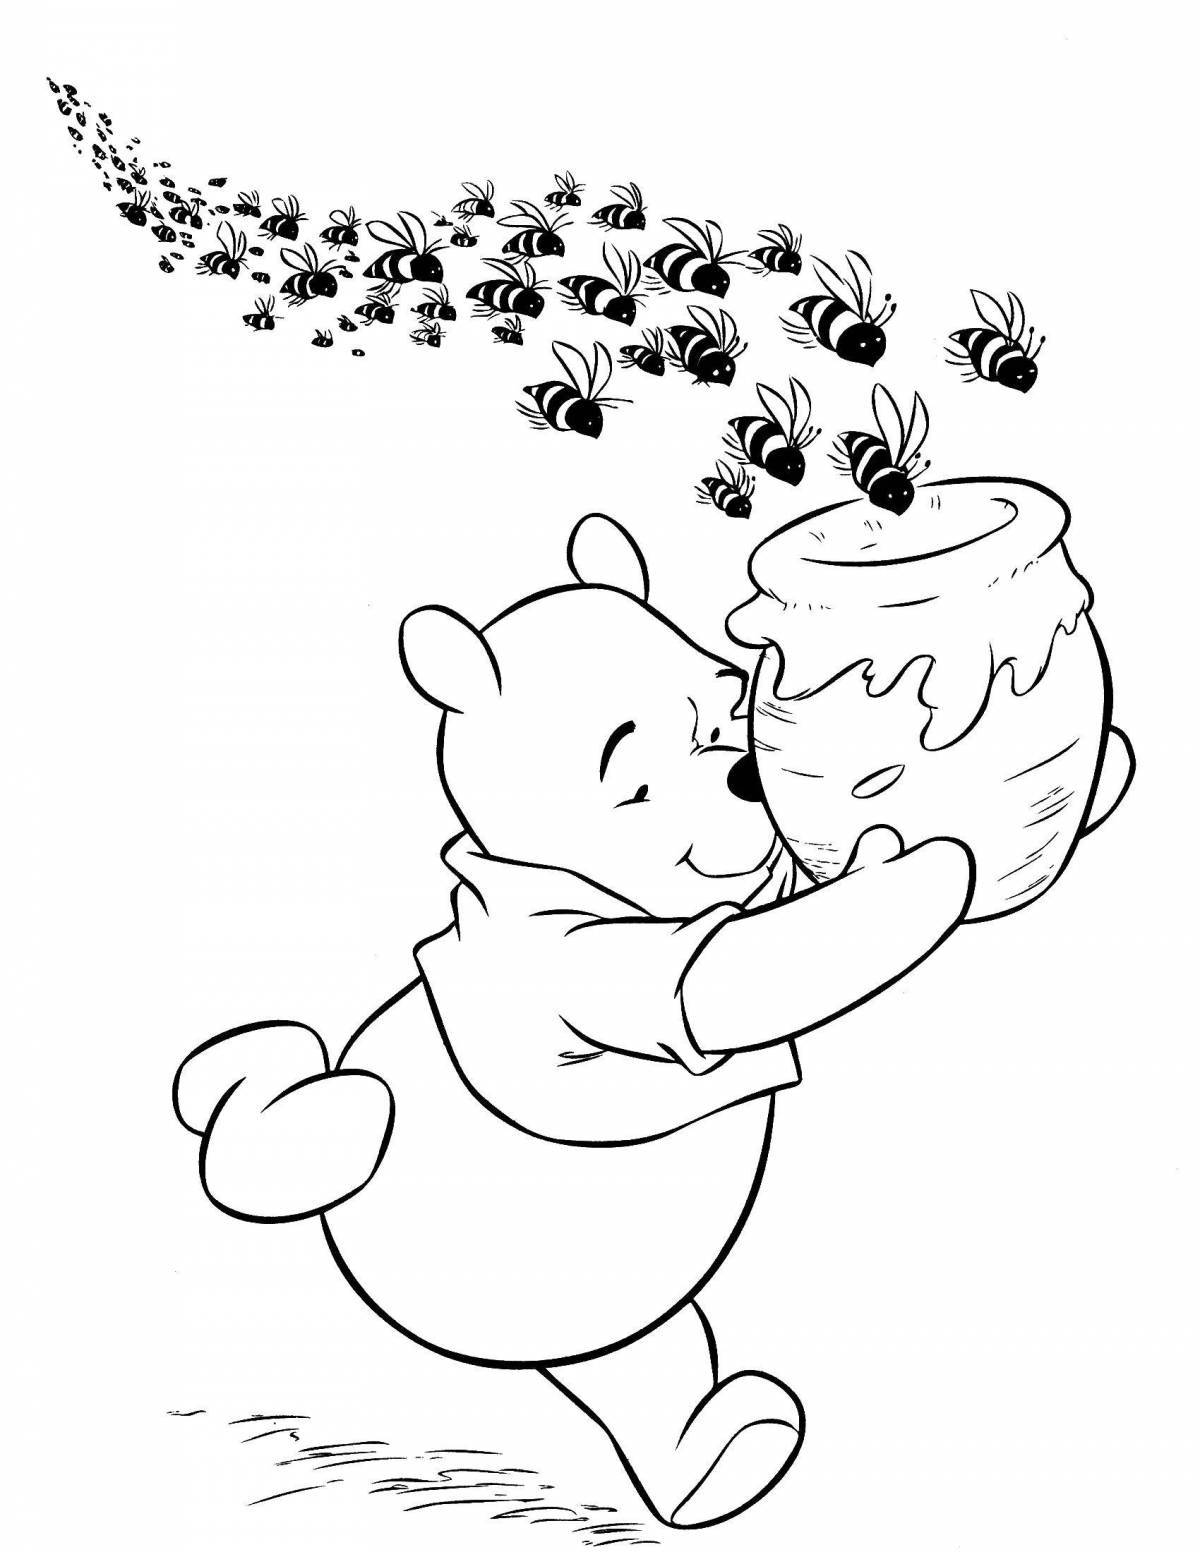 Winnie the pooh's nice coloring book